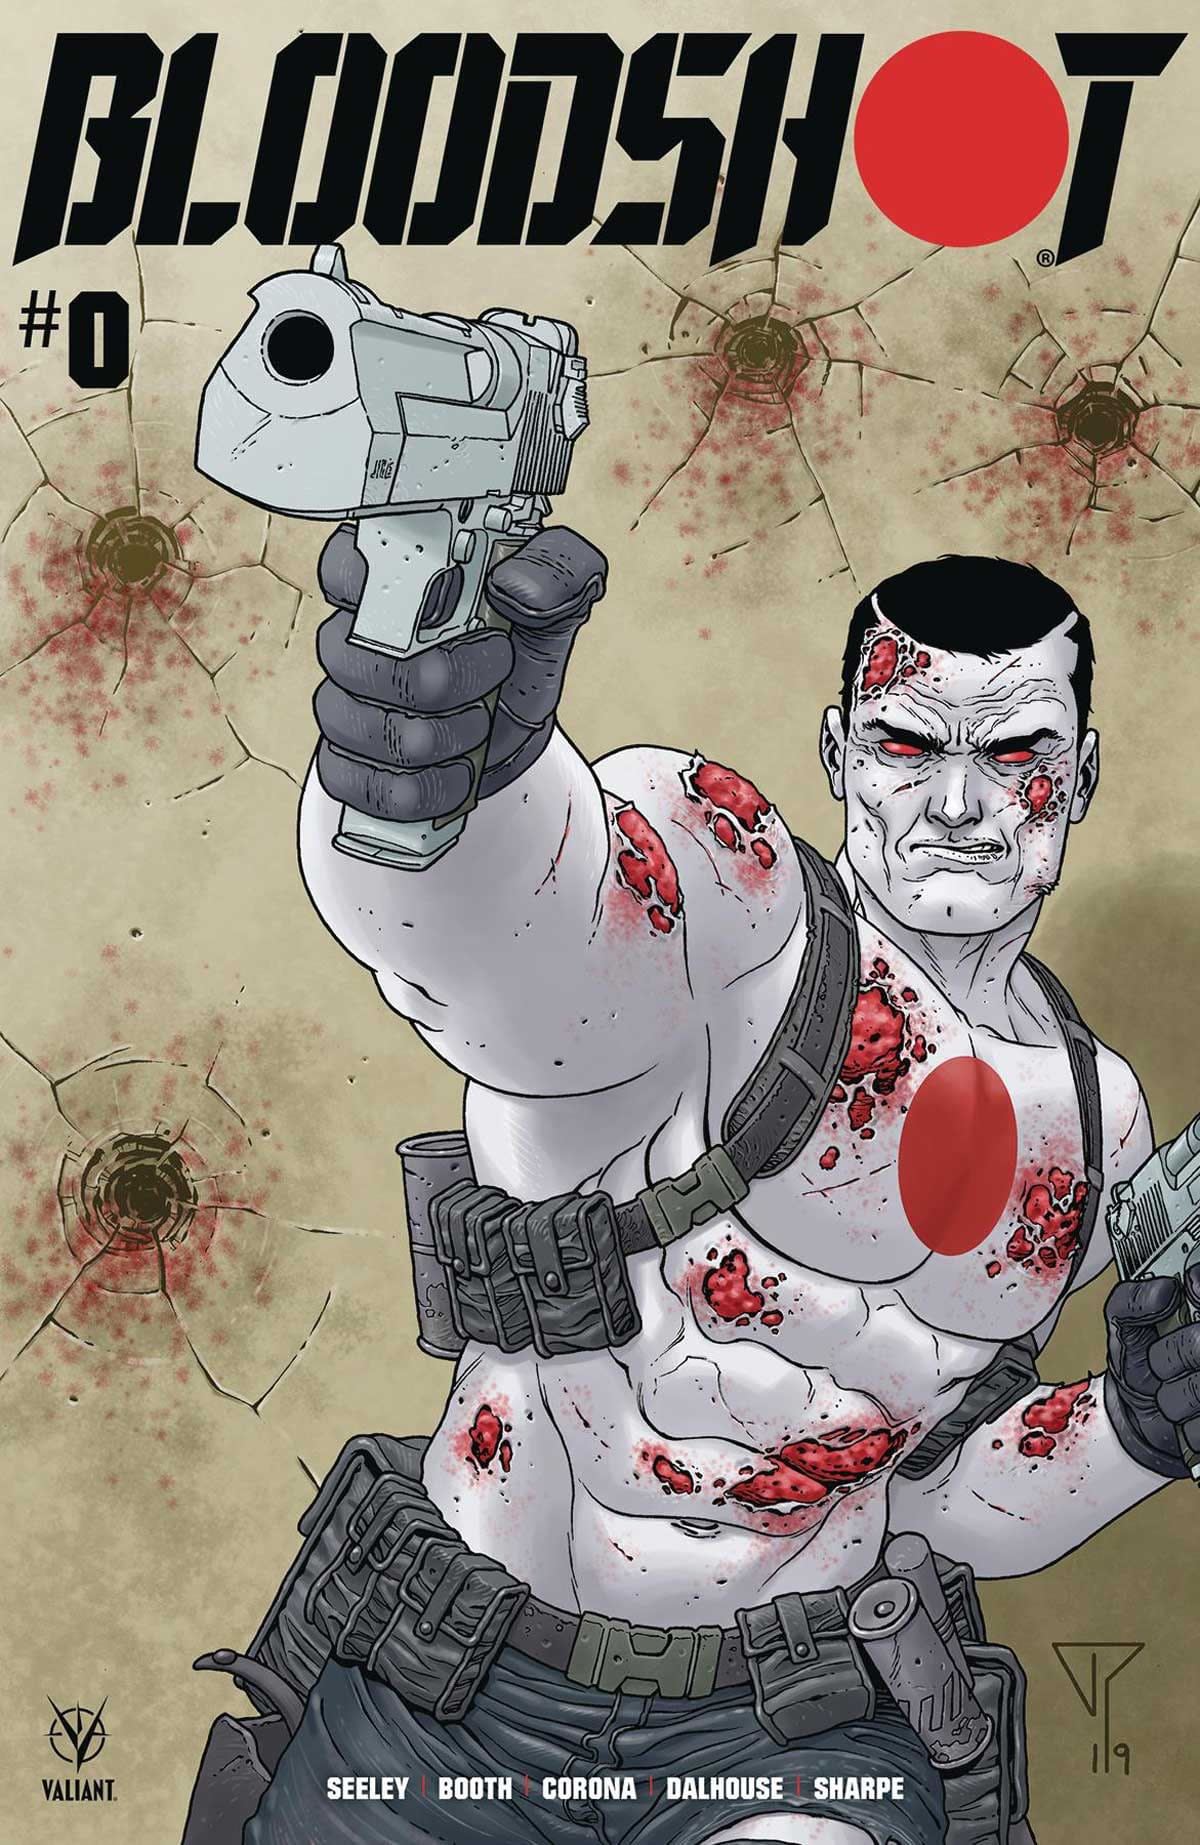 REVIEW: Bloodshot #0 -- "Gives You Everything You Need To Know About The Title Character"